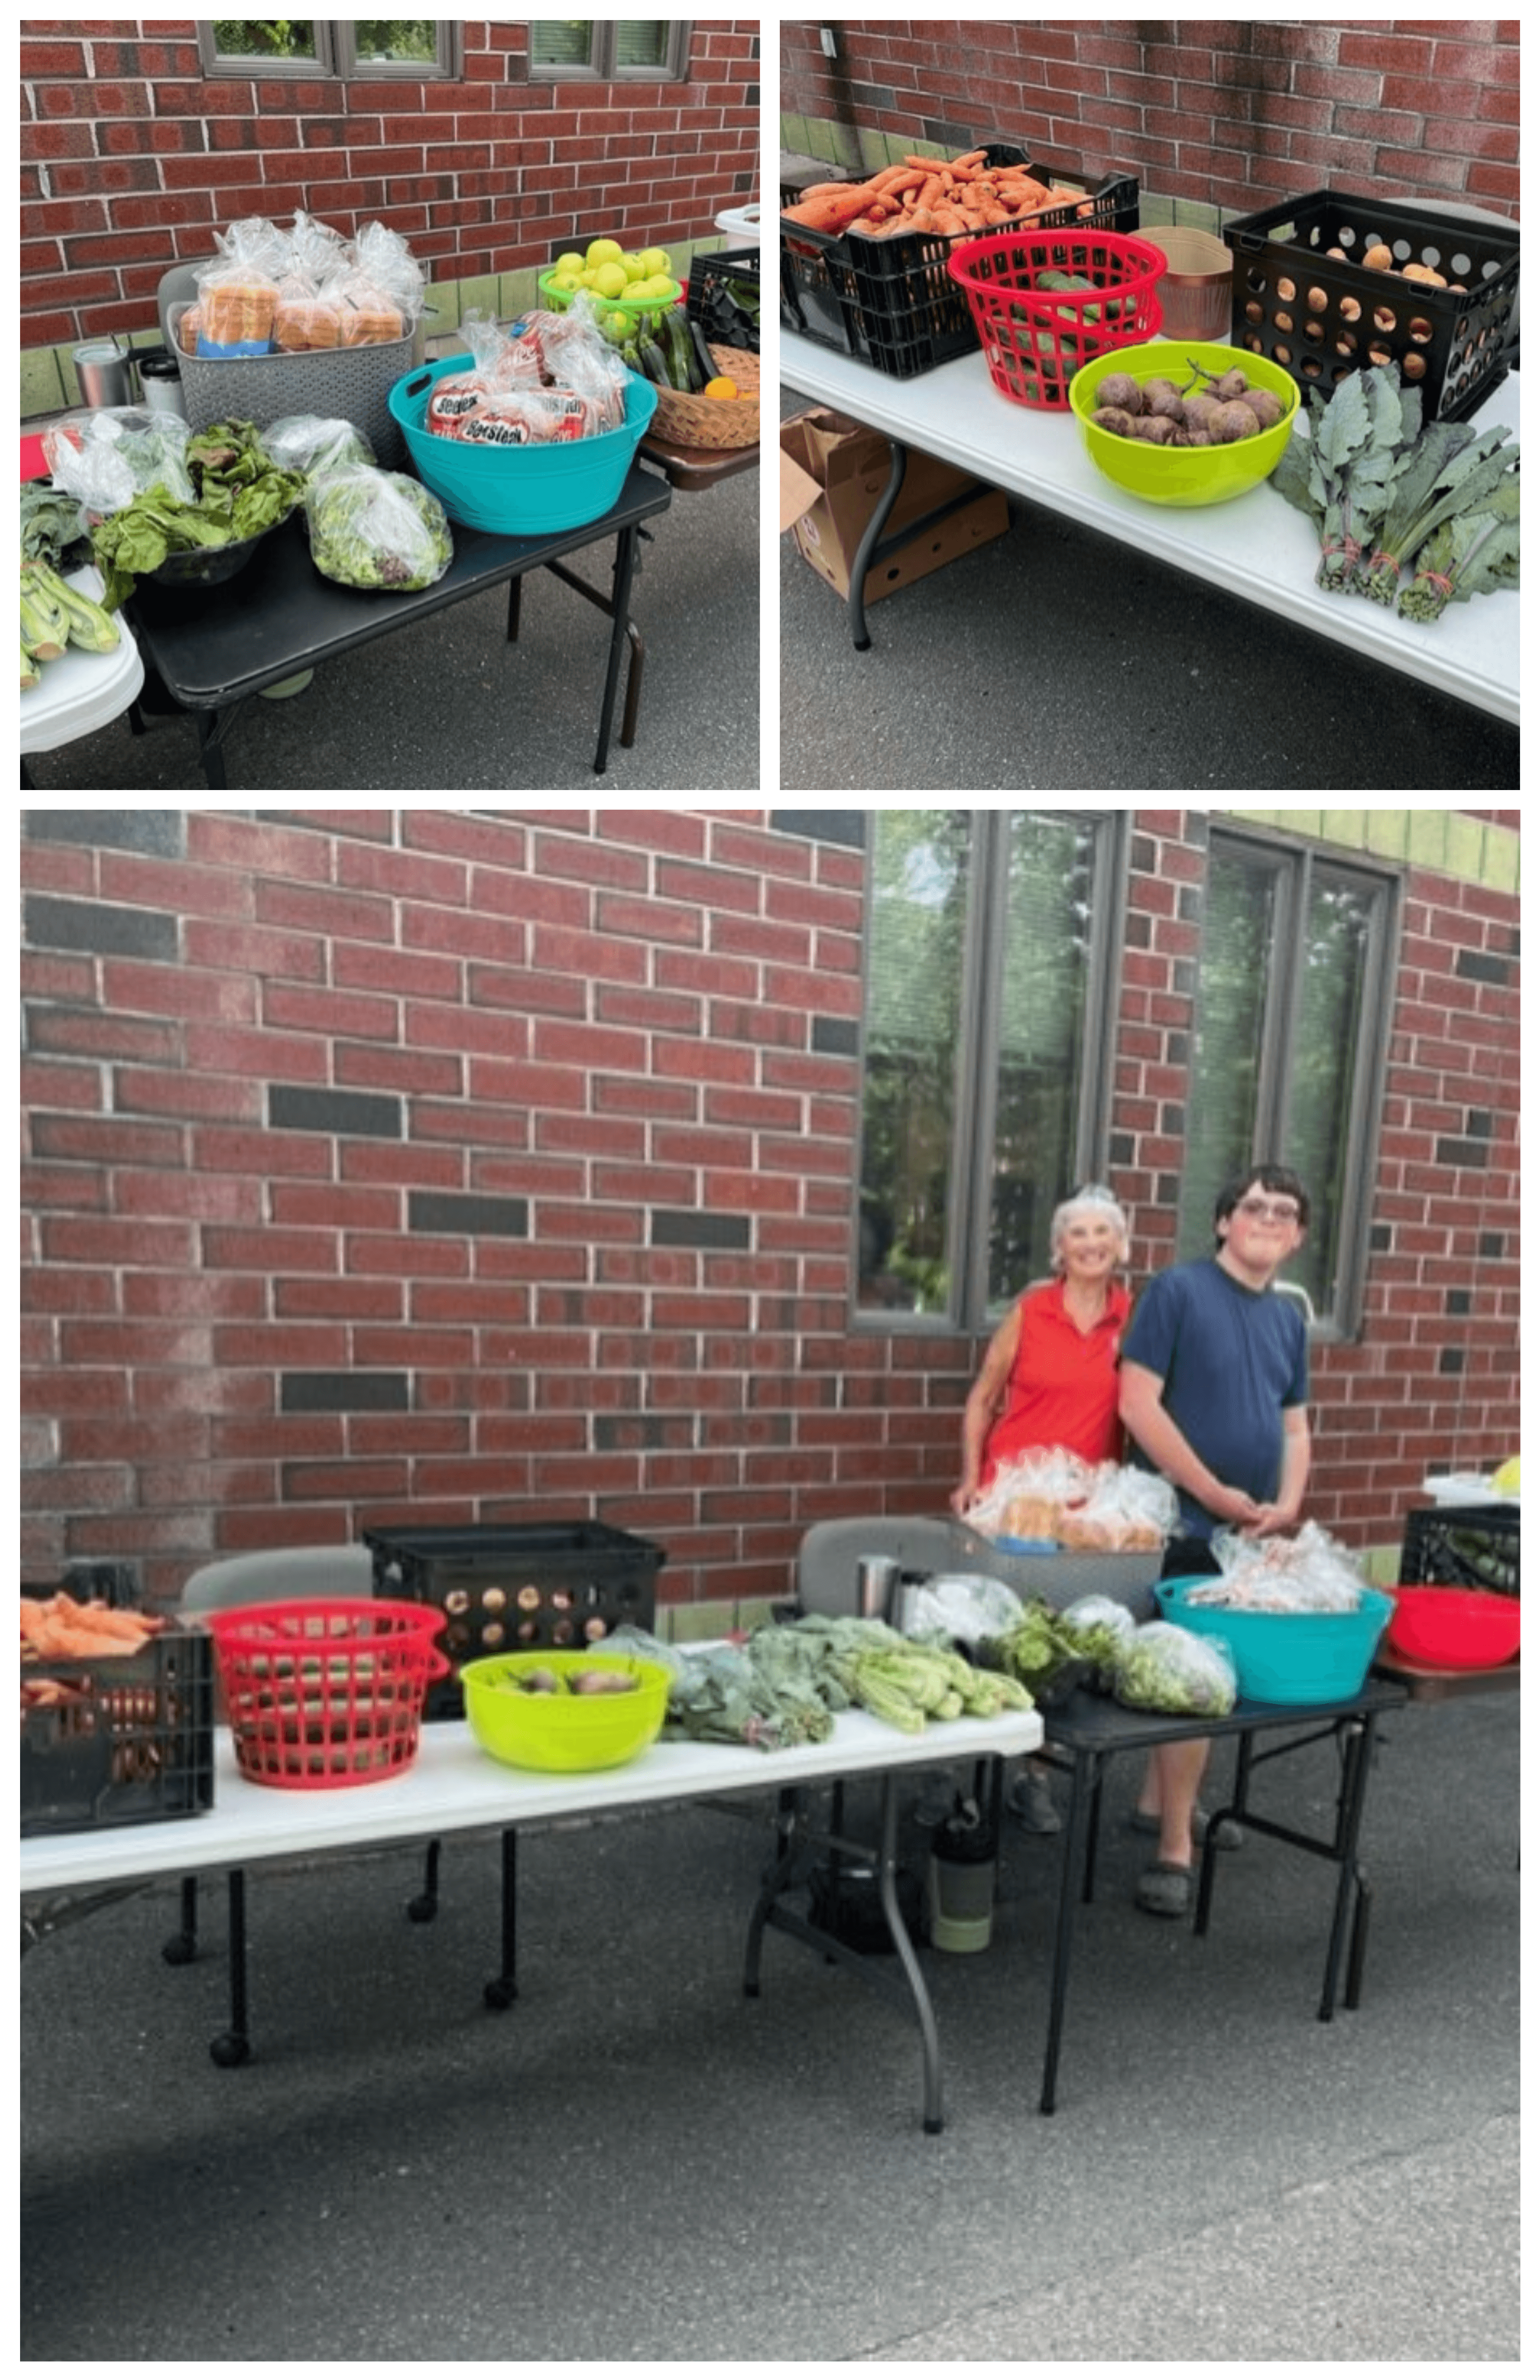 Spotlight on our Food Pantry Produce Stand!